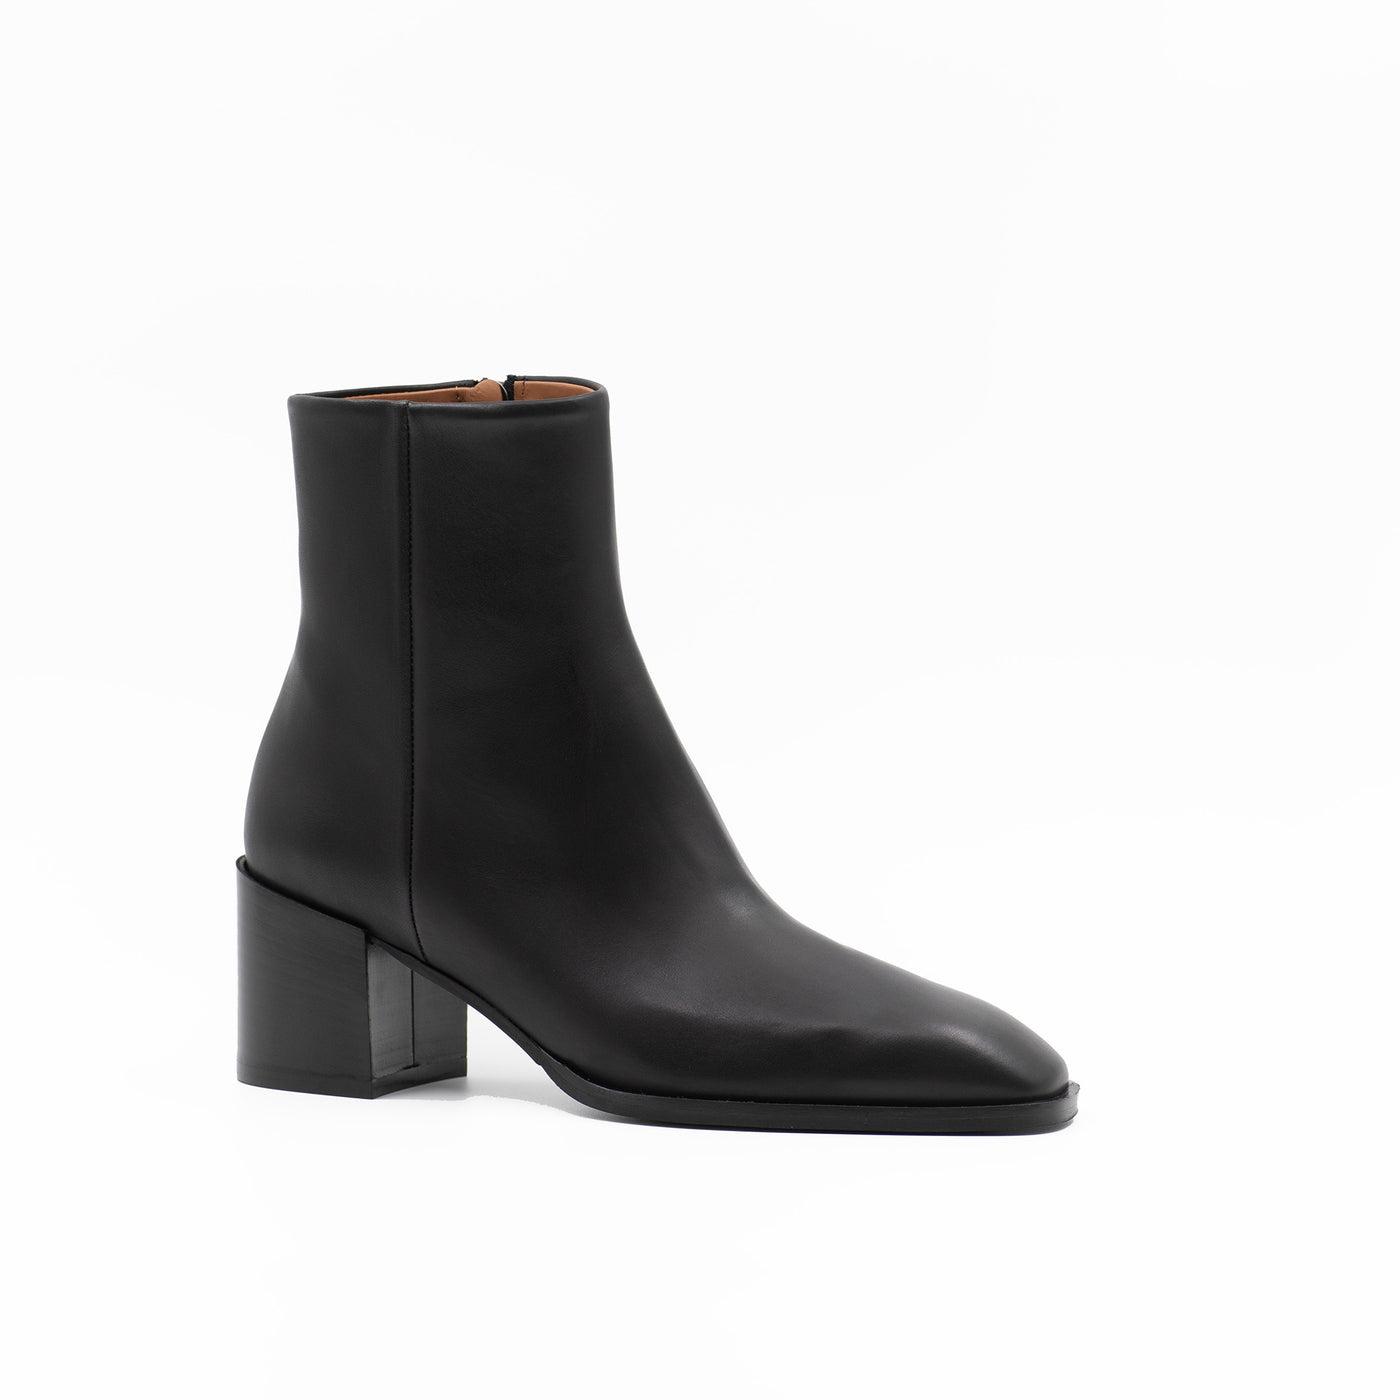 Heeled ankle boot in black leather